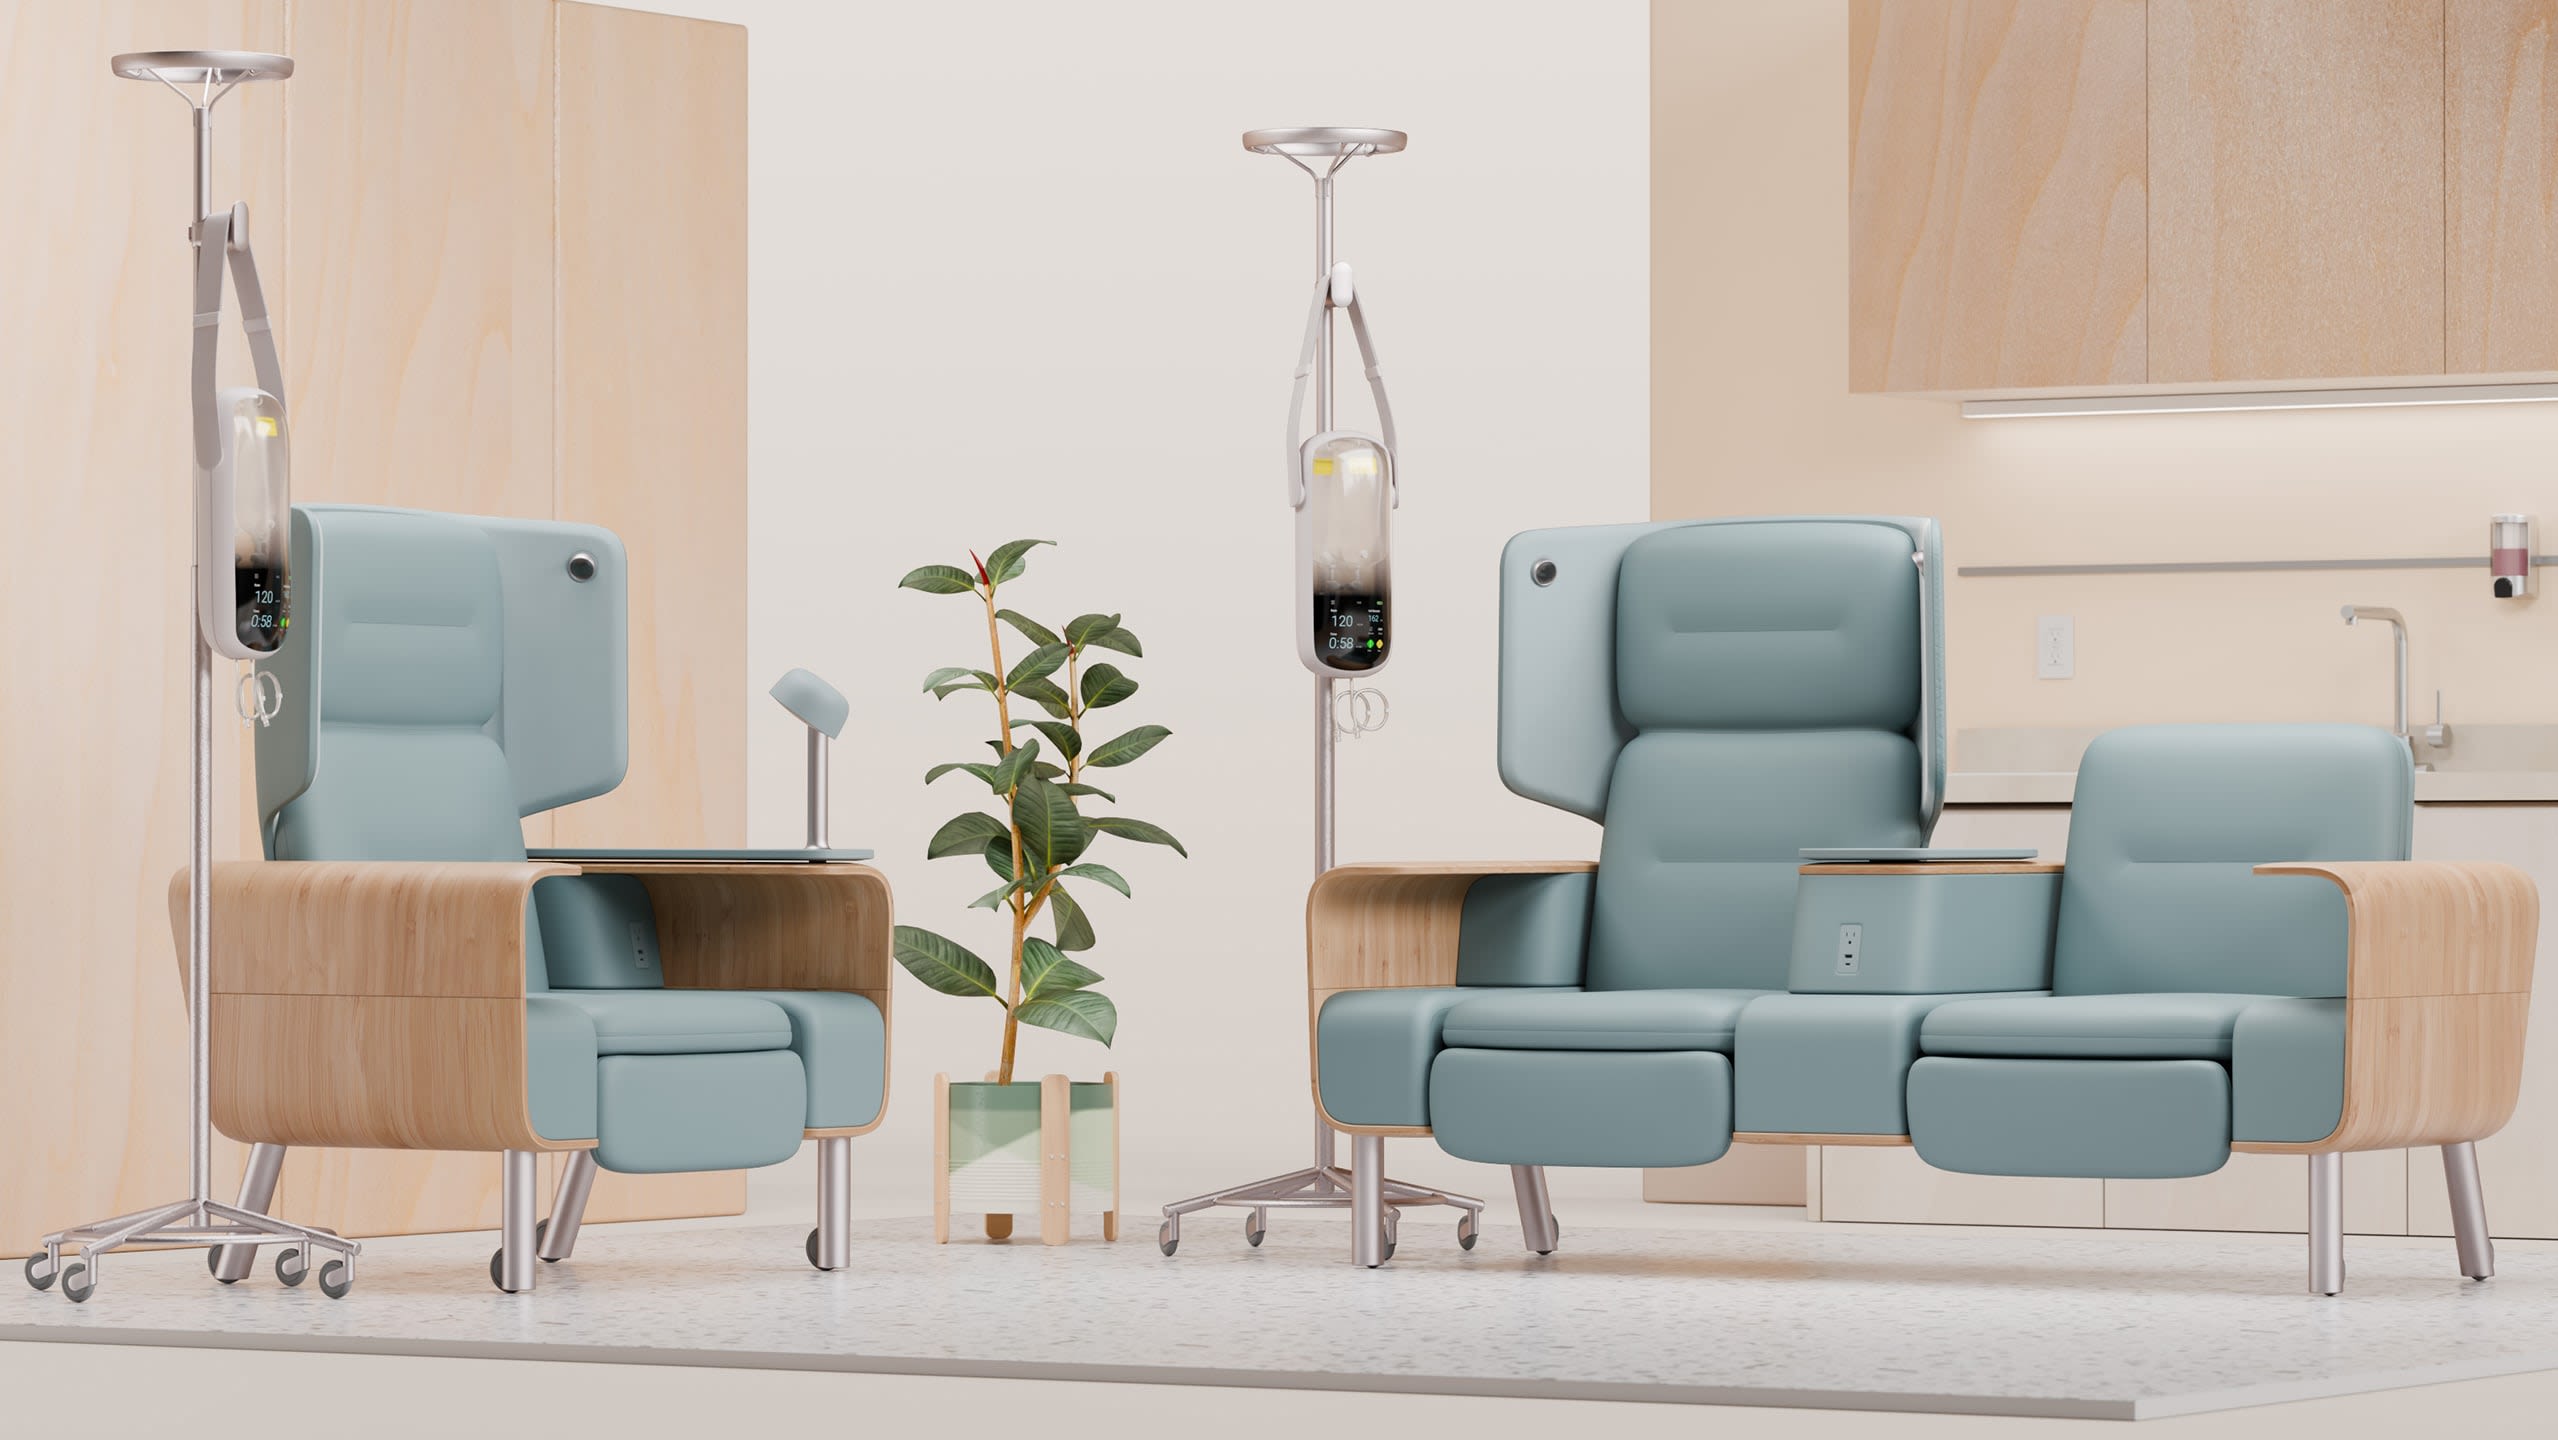 This unusual chemotherapy chair was designed for patient comfort